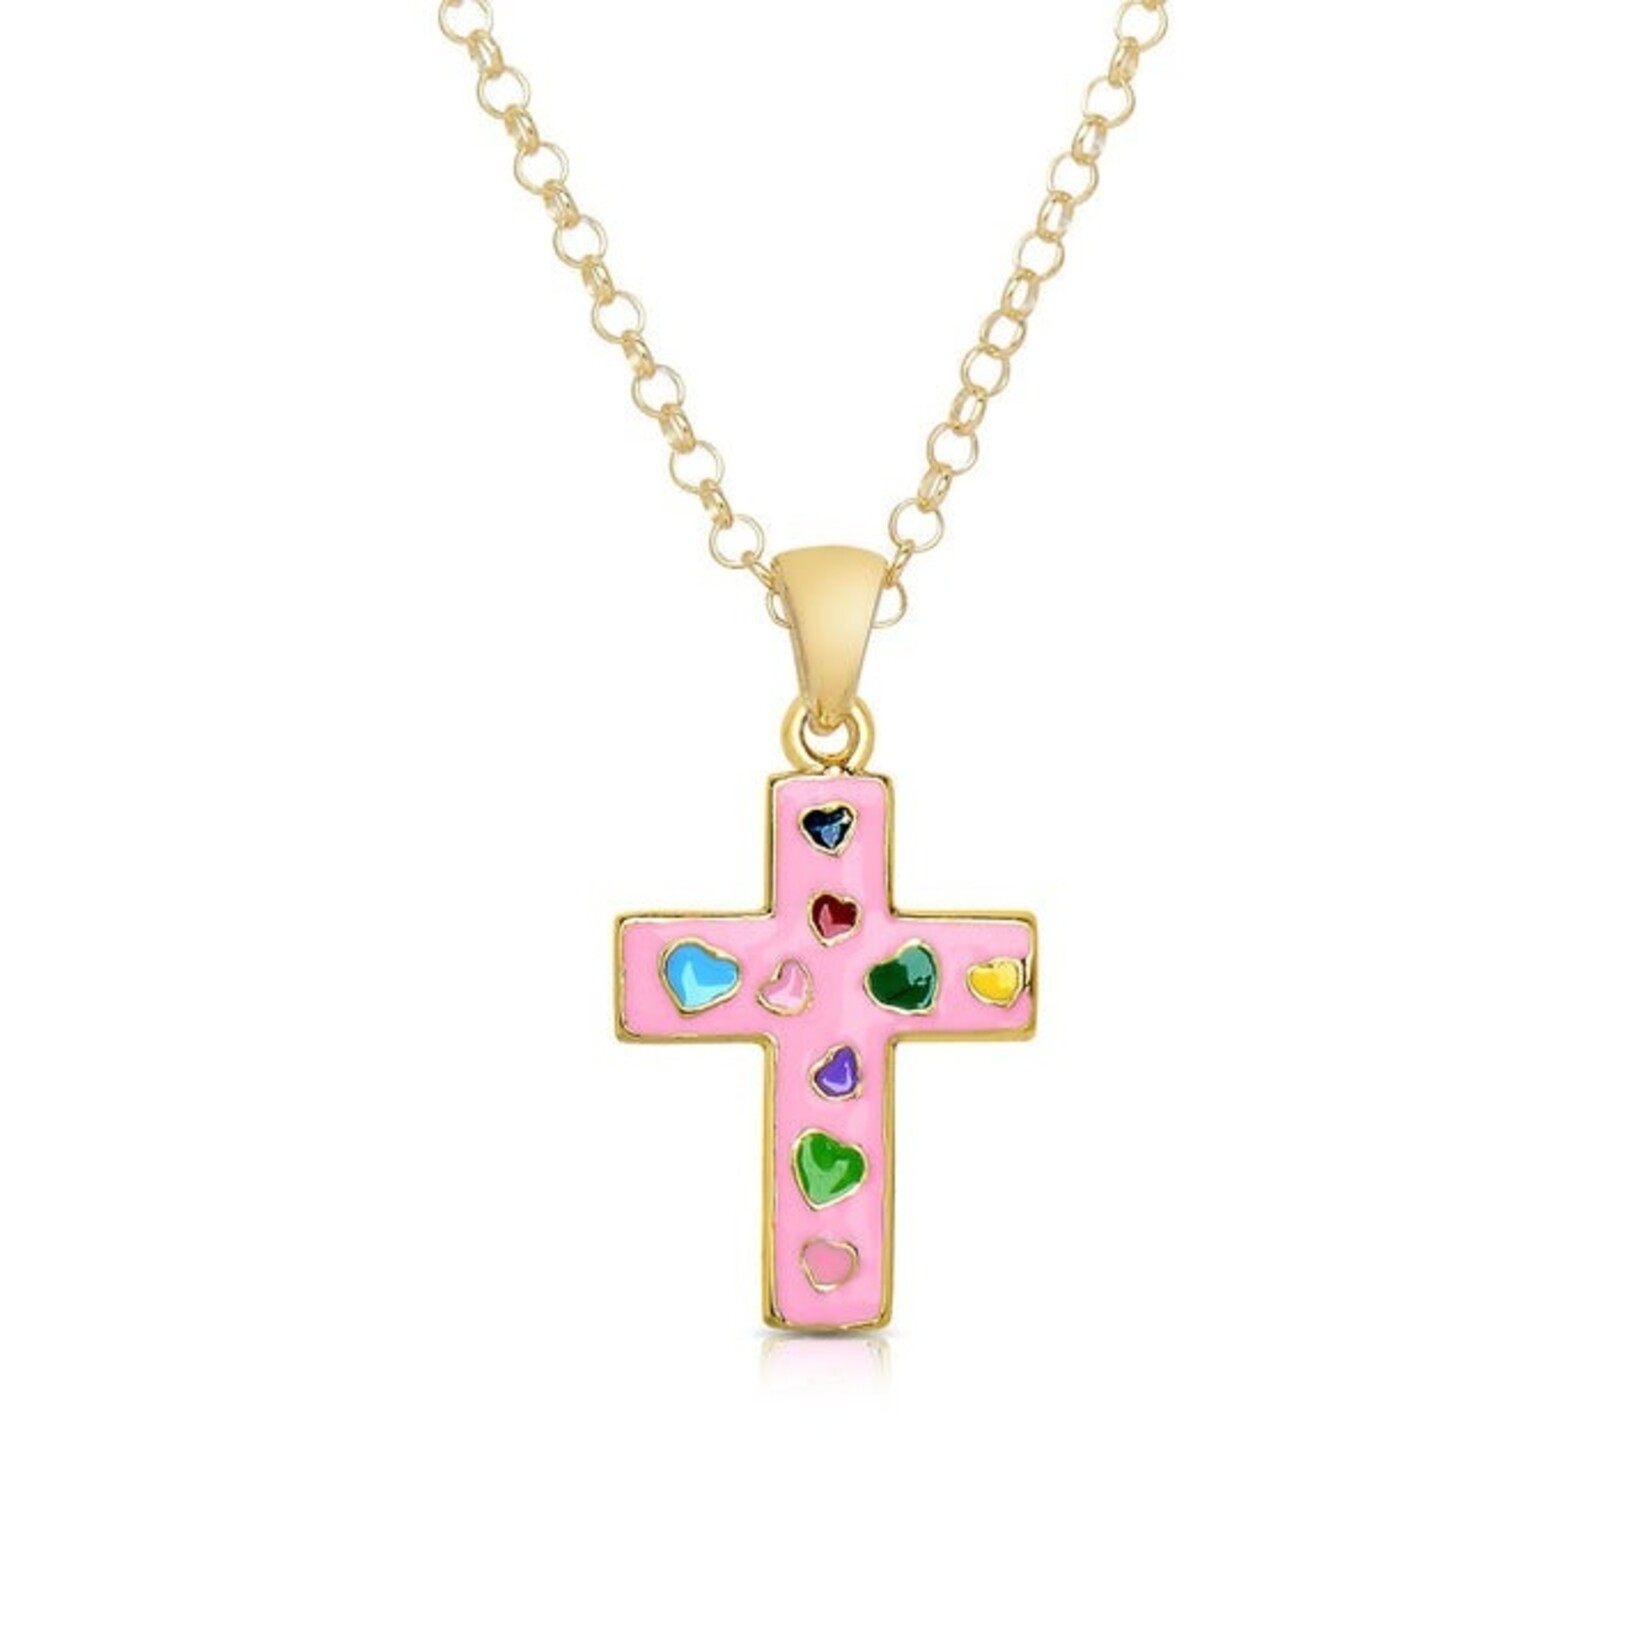 Lily Nily Pink Cross Necklace W/Hearts